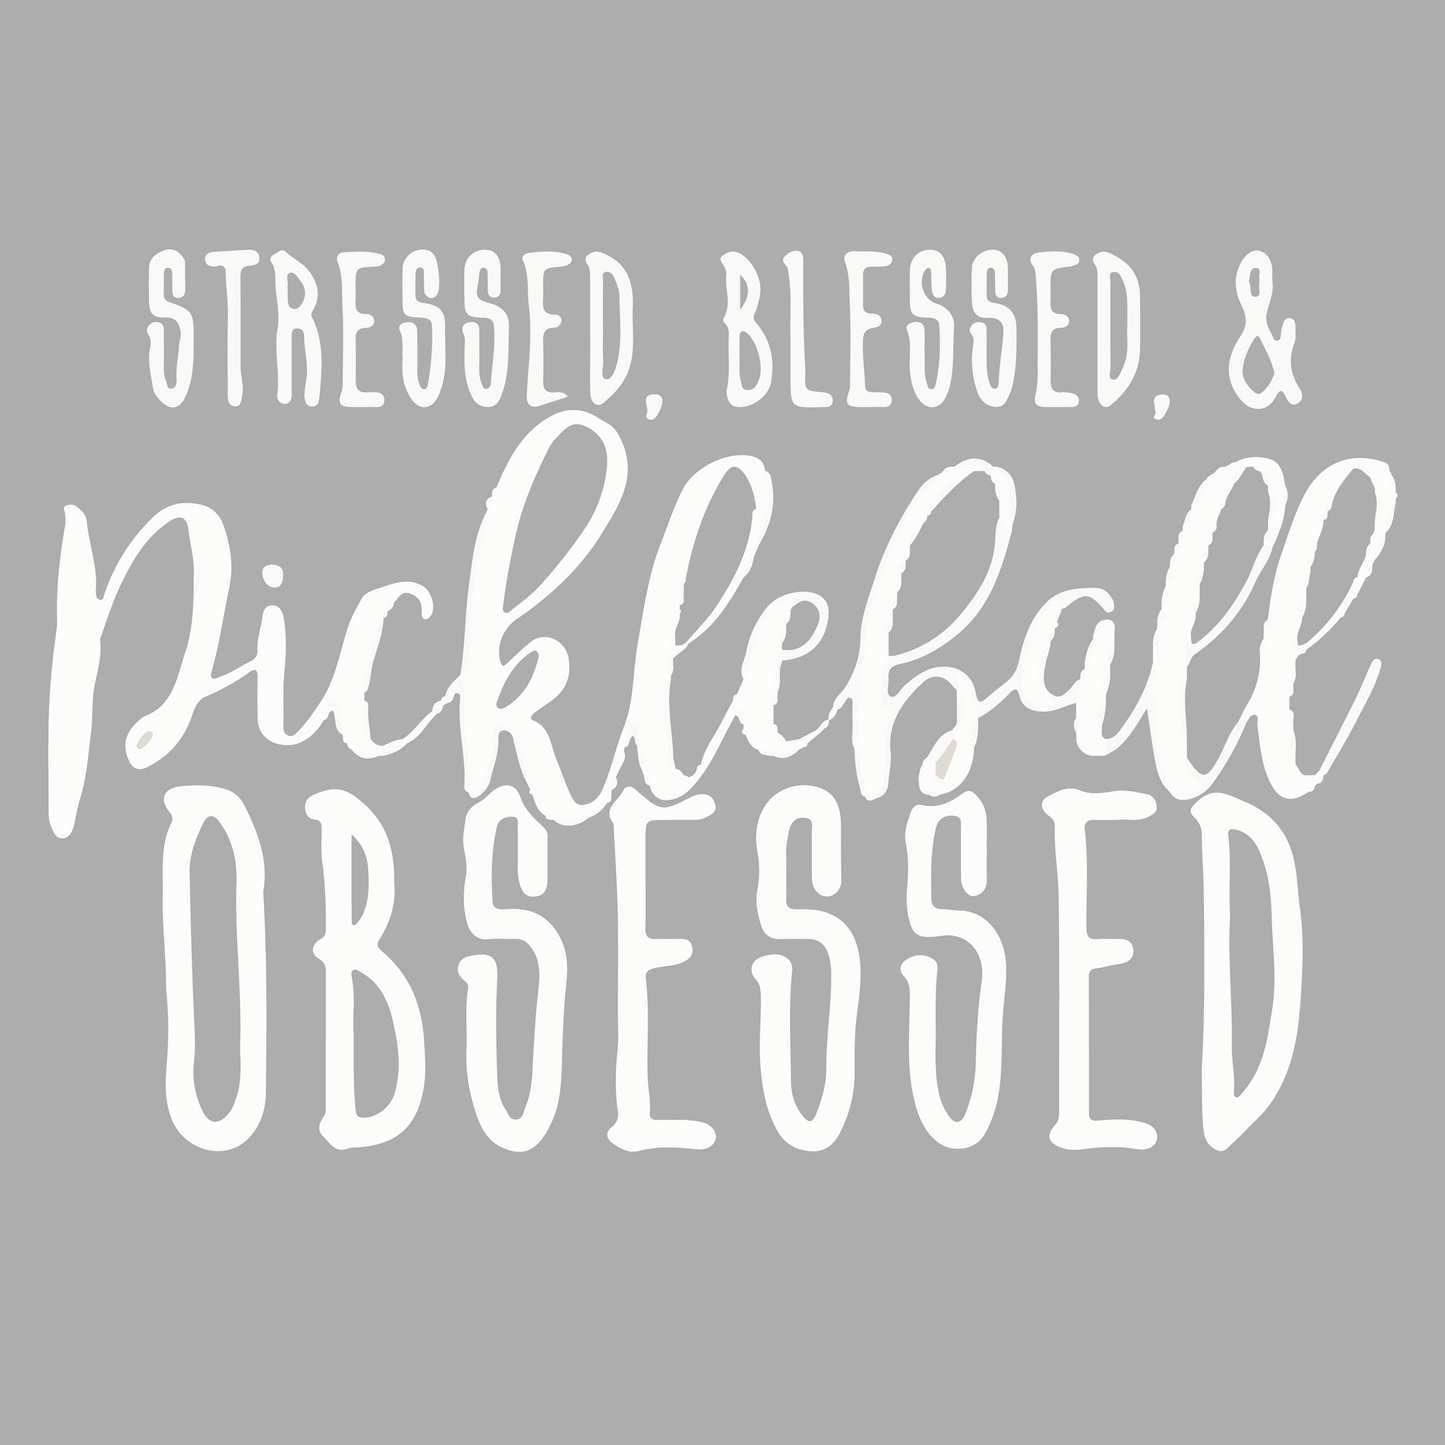 Stressed Blessed & Pickleball Obsessed | Women's Long Sleeve Scoop Neck Pickleball Shirts | 75/13/12 poly/cotton/rayon